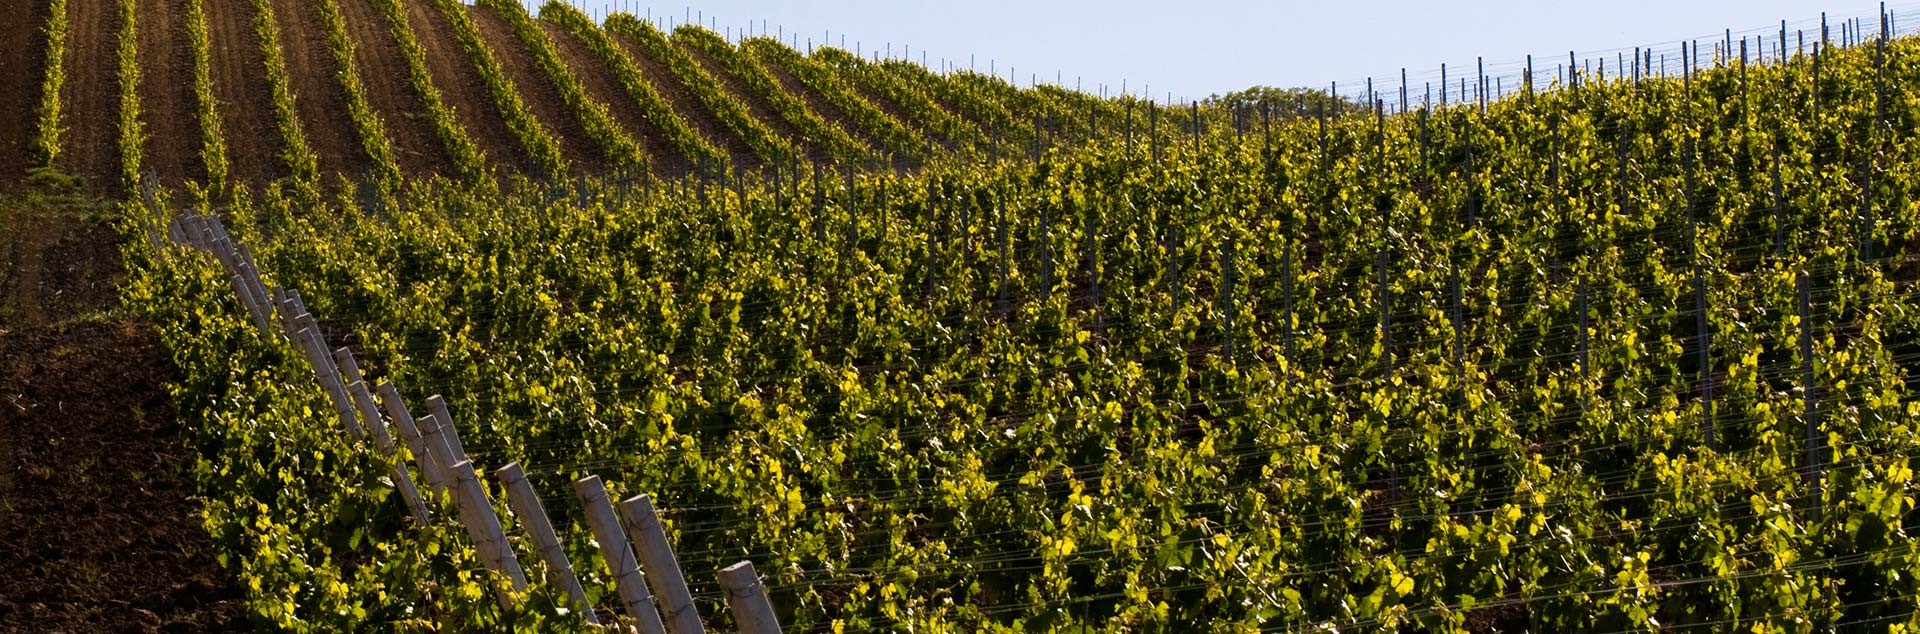 Vineyards in Camporeale